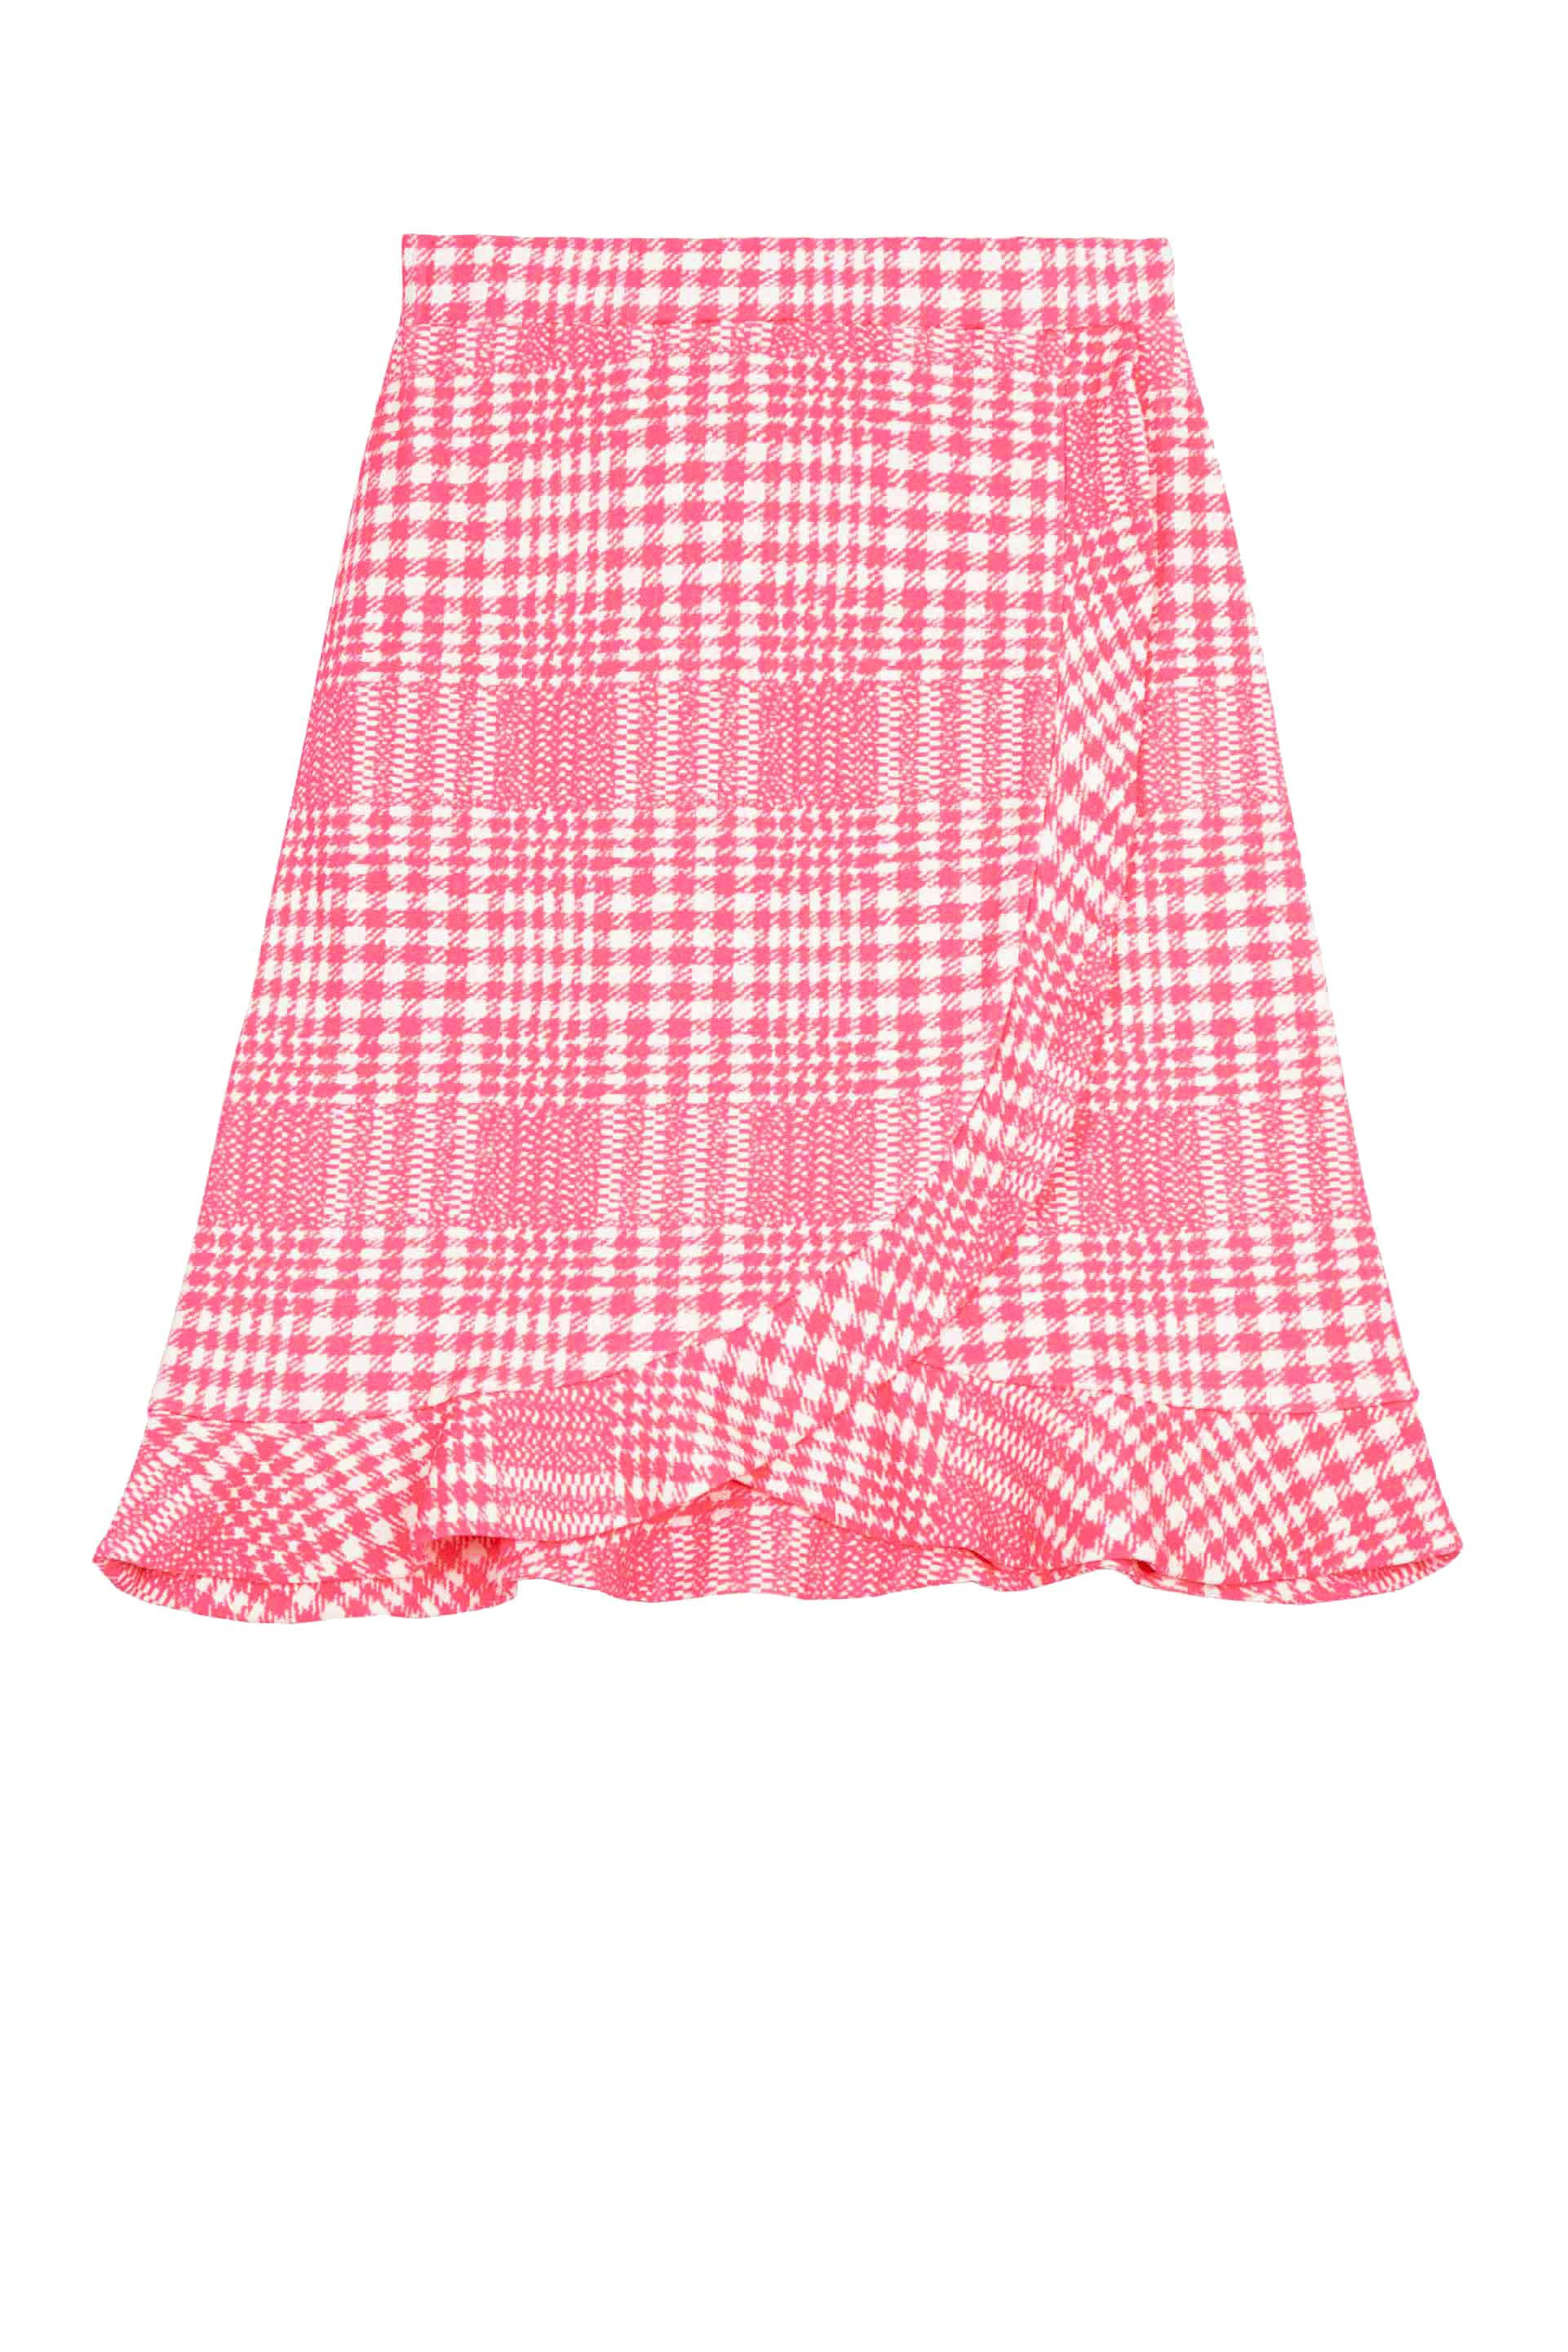 52235_millie_check_skirt_pink_fizz_and_blossom_edit.jpg